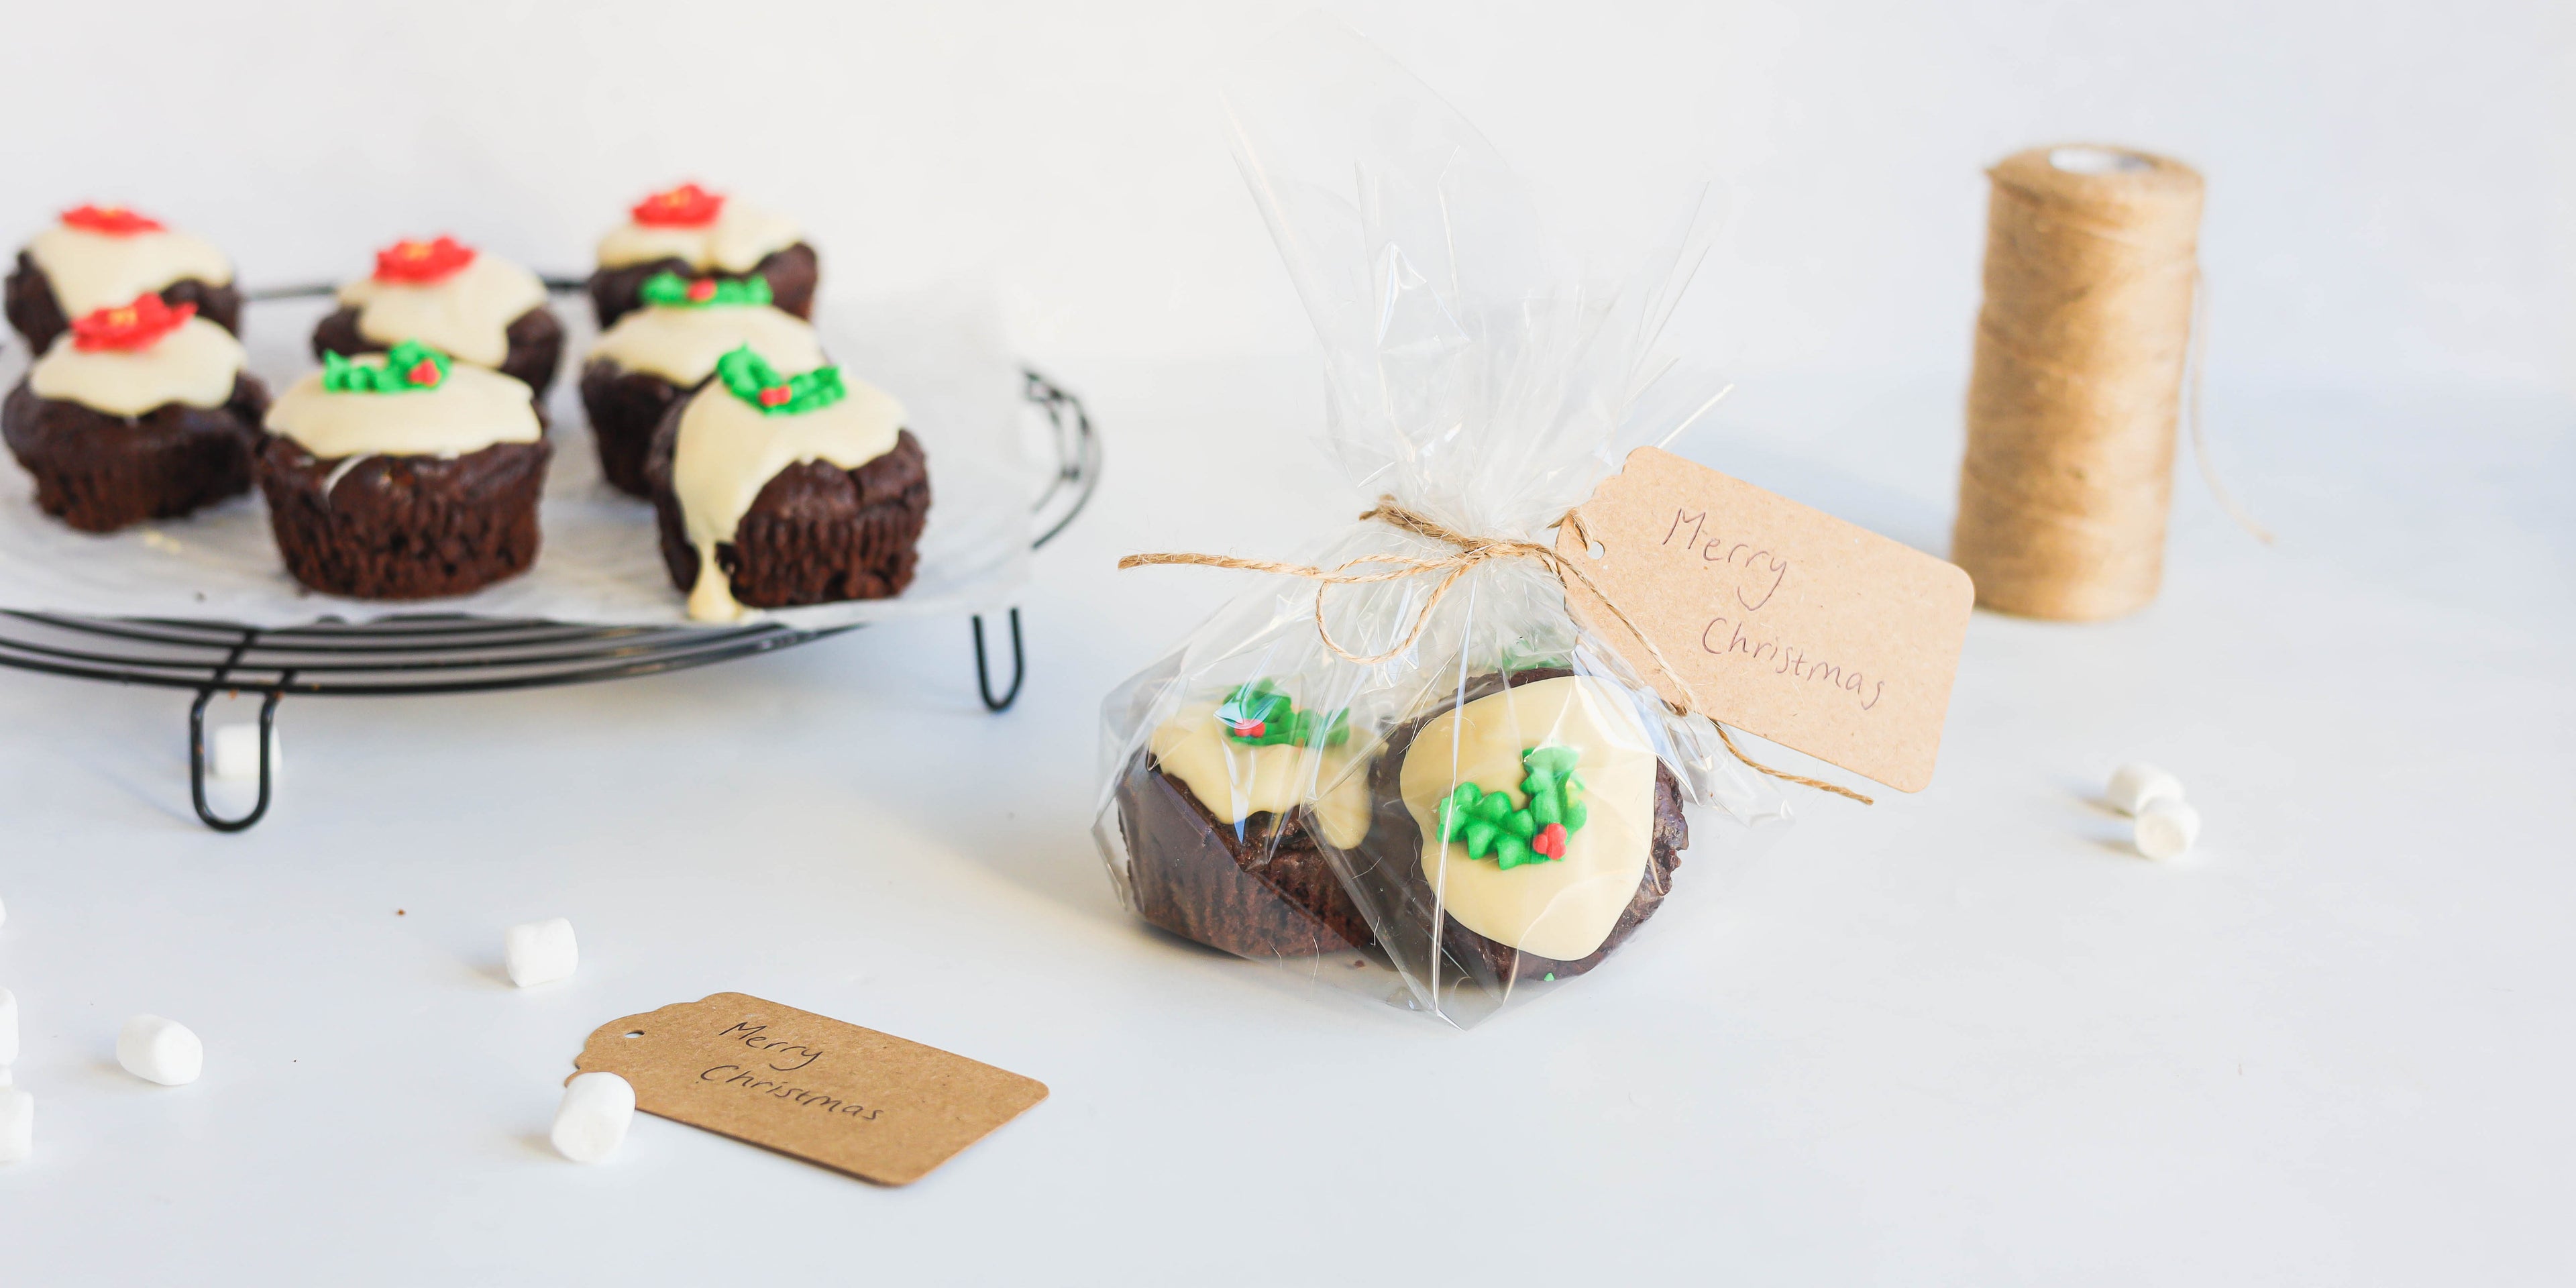 Mini Rocky Road Christmas Pudding Muffins on a wire rack, with a package of Mini Rocky Road Christmas Pudding Muffins hand tied in the foreground with a handwritten Christmas gift greeting